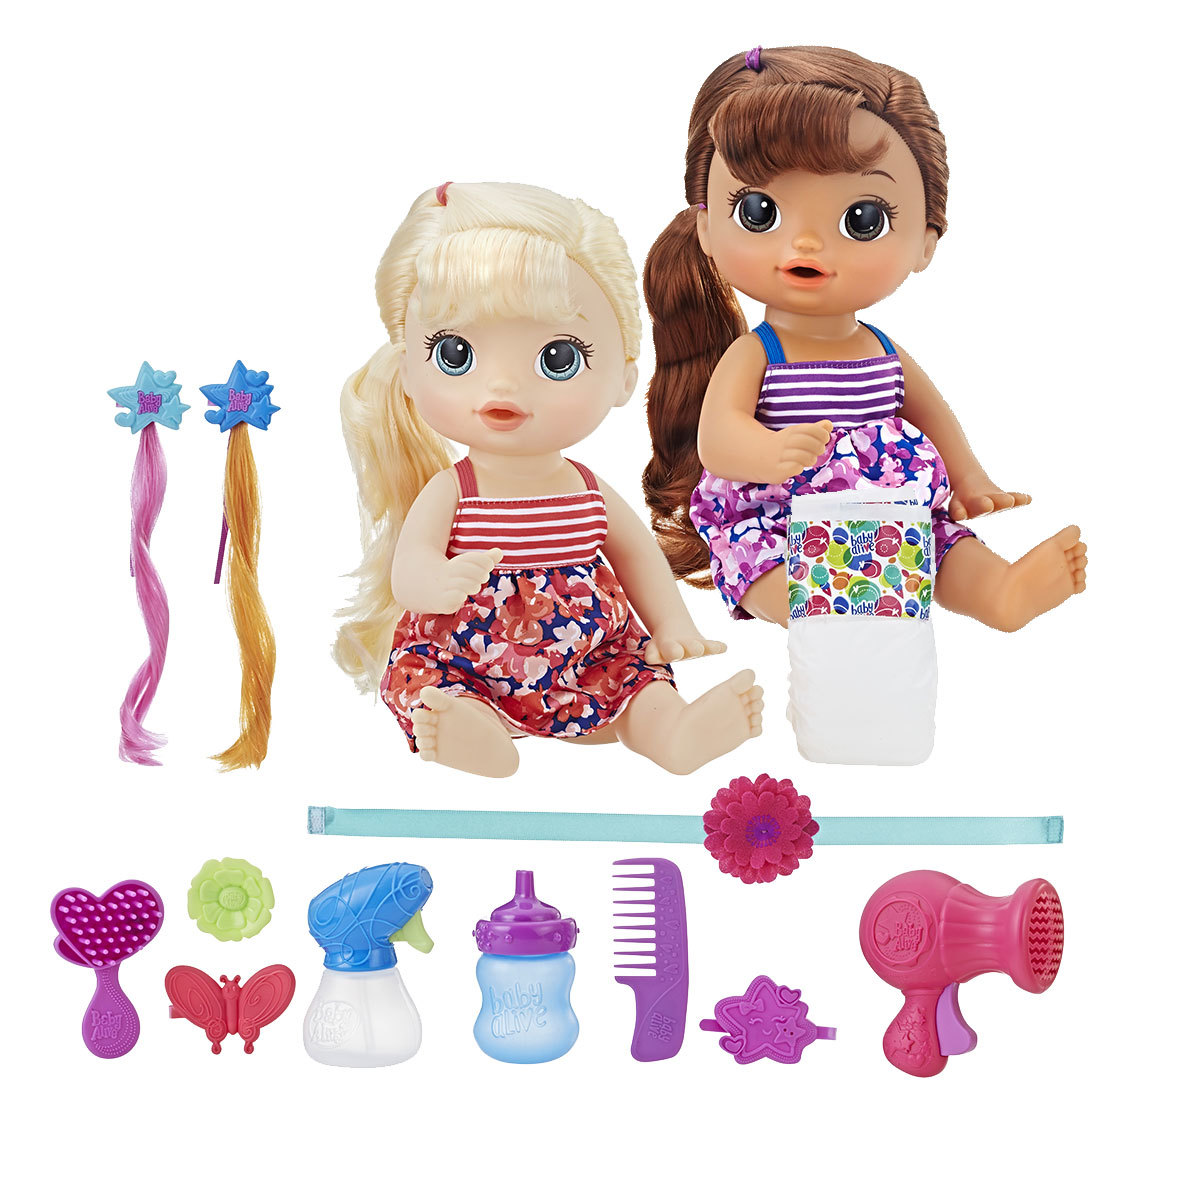 Image of Flowers hairstyle for Baby Alive